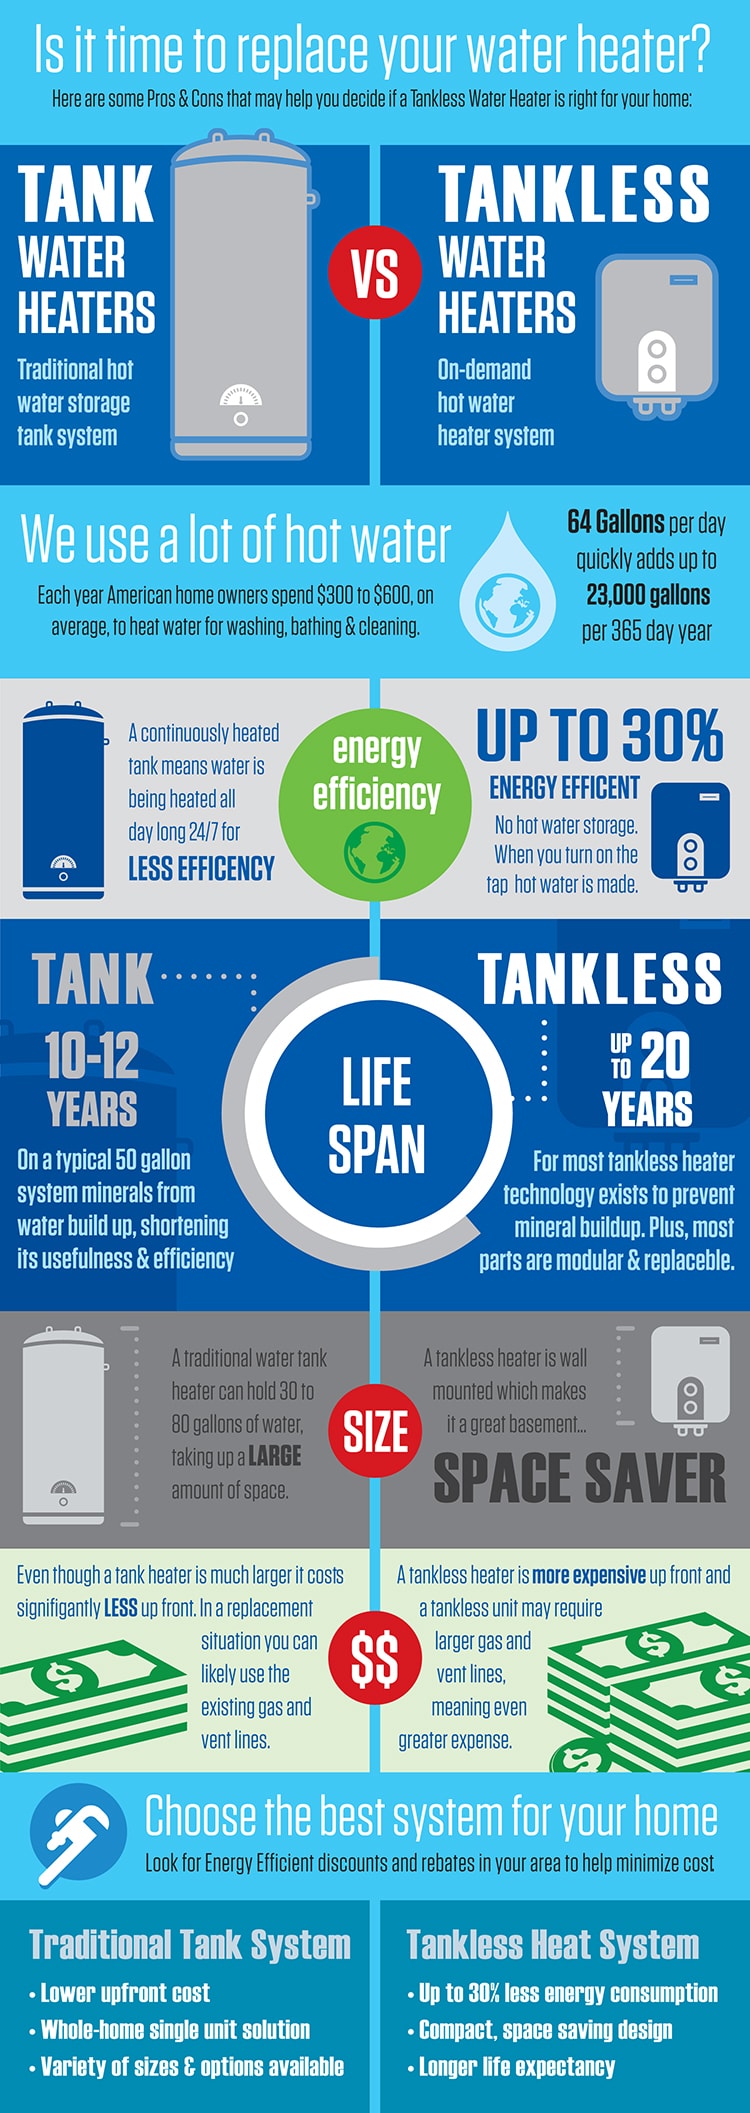 tankless water heater vs tank water heater infographic